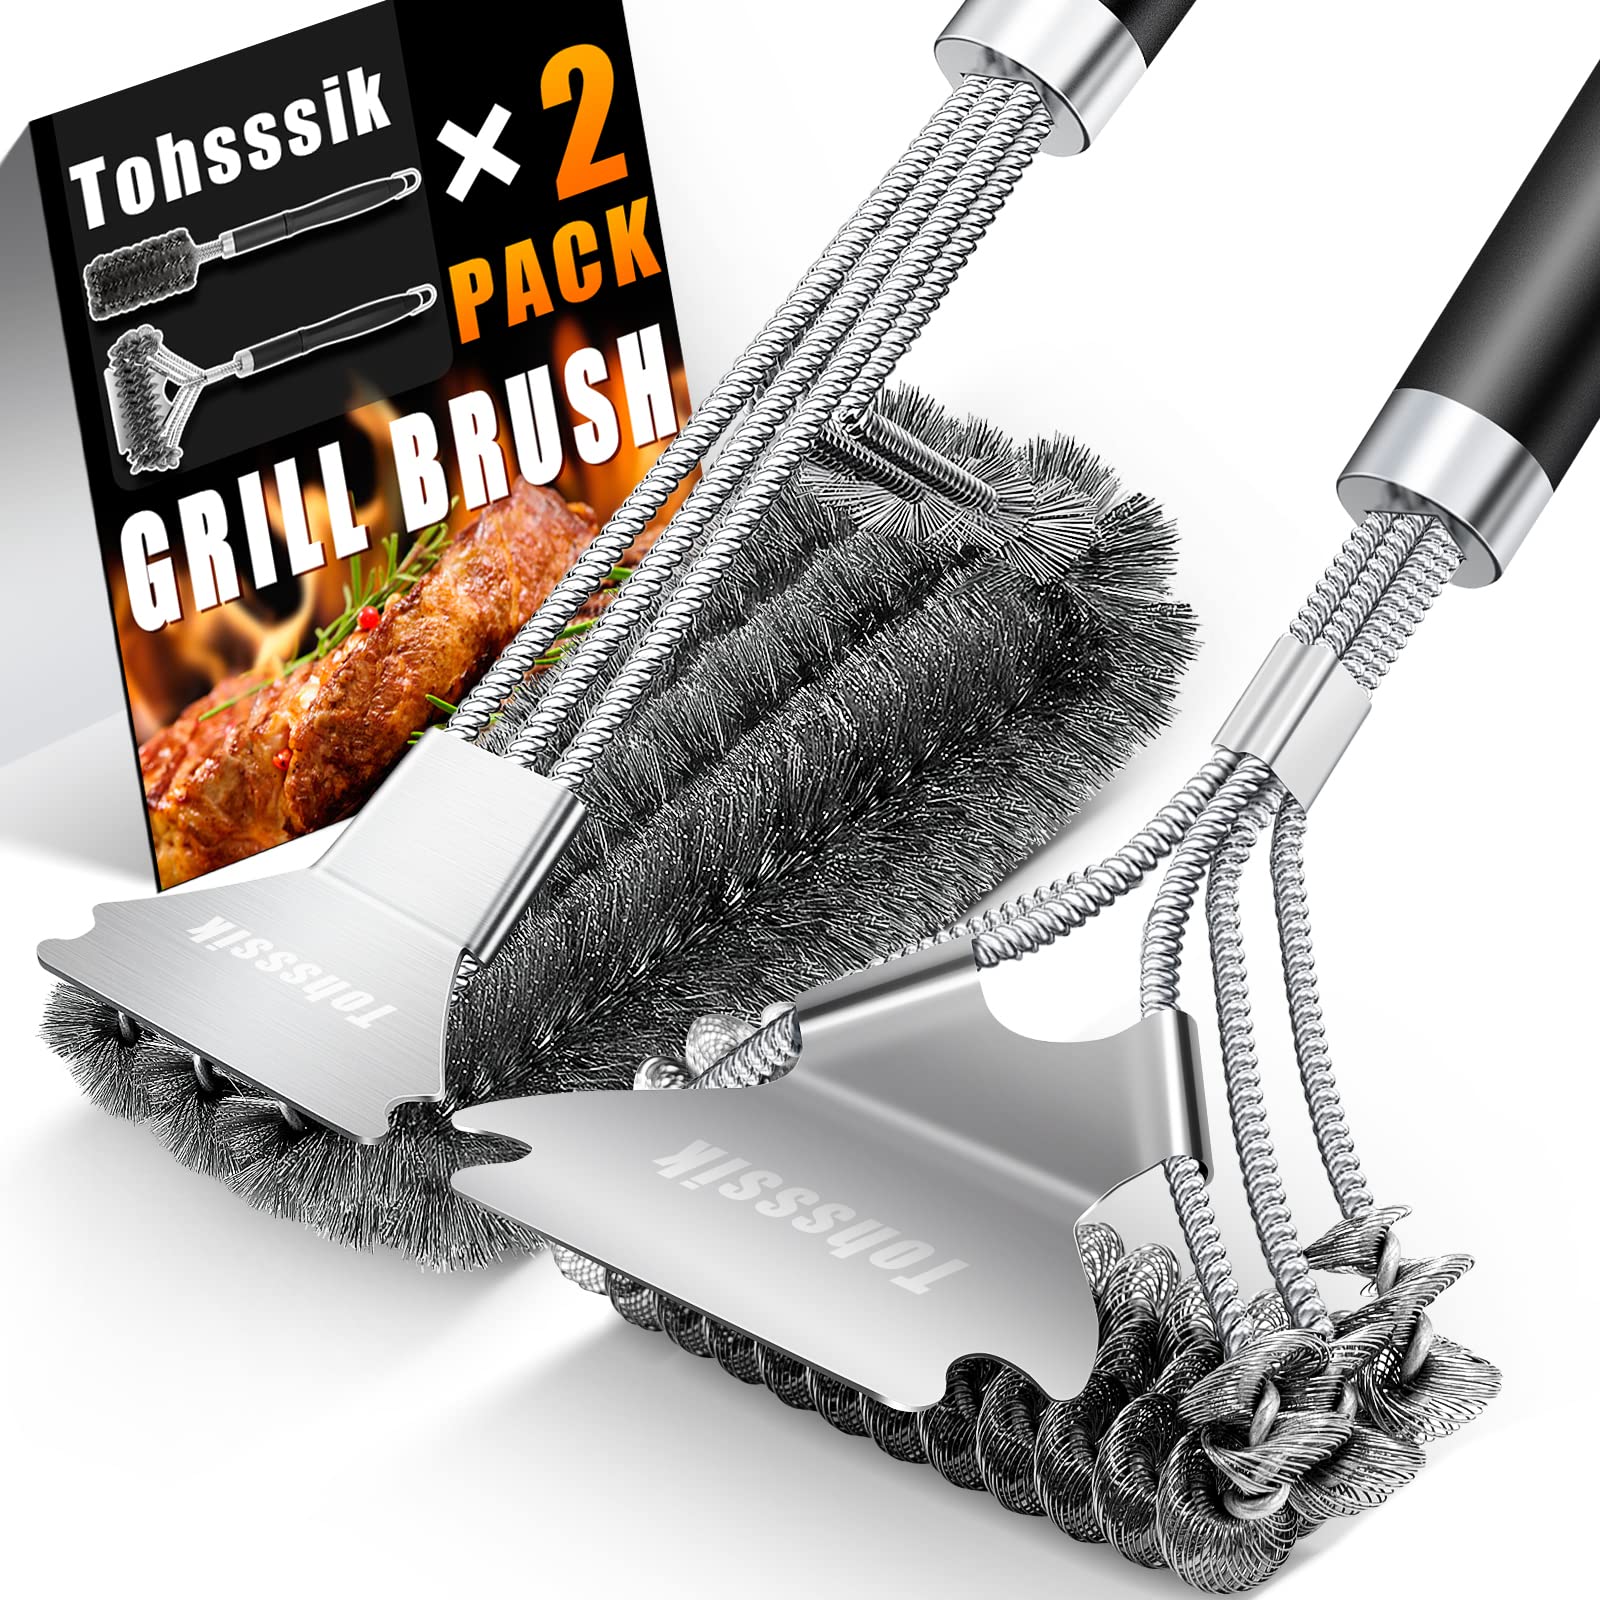 Tohsssik 2pcs grill Brush for Outdoor grill, Stainless grill cleaner Brush and Scraper, 17 BBQ Brush for grill cleaning & grill 